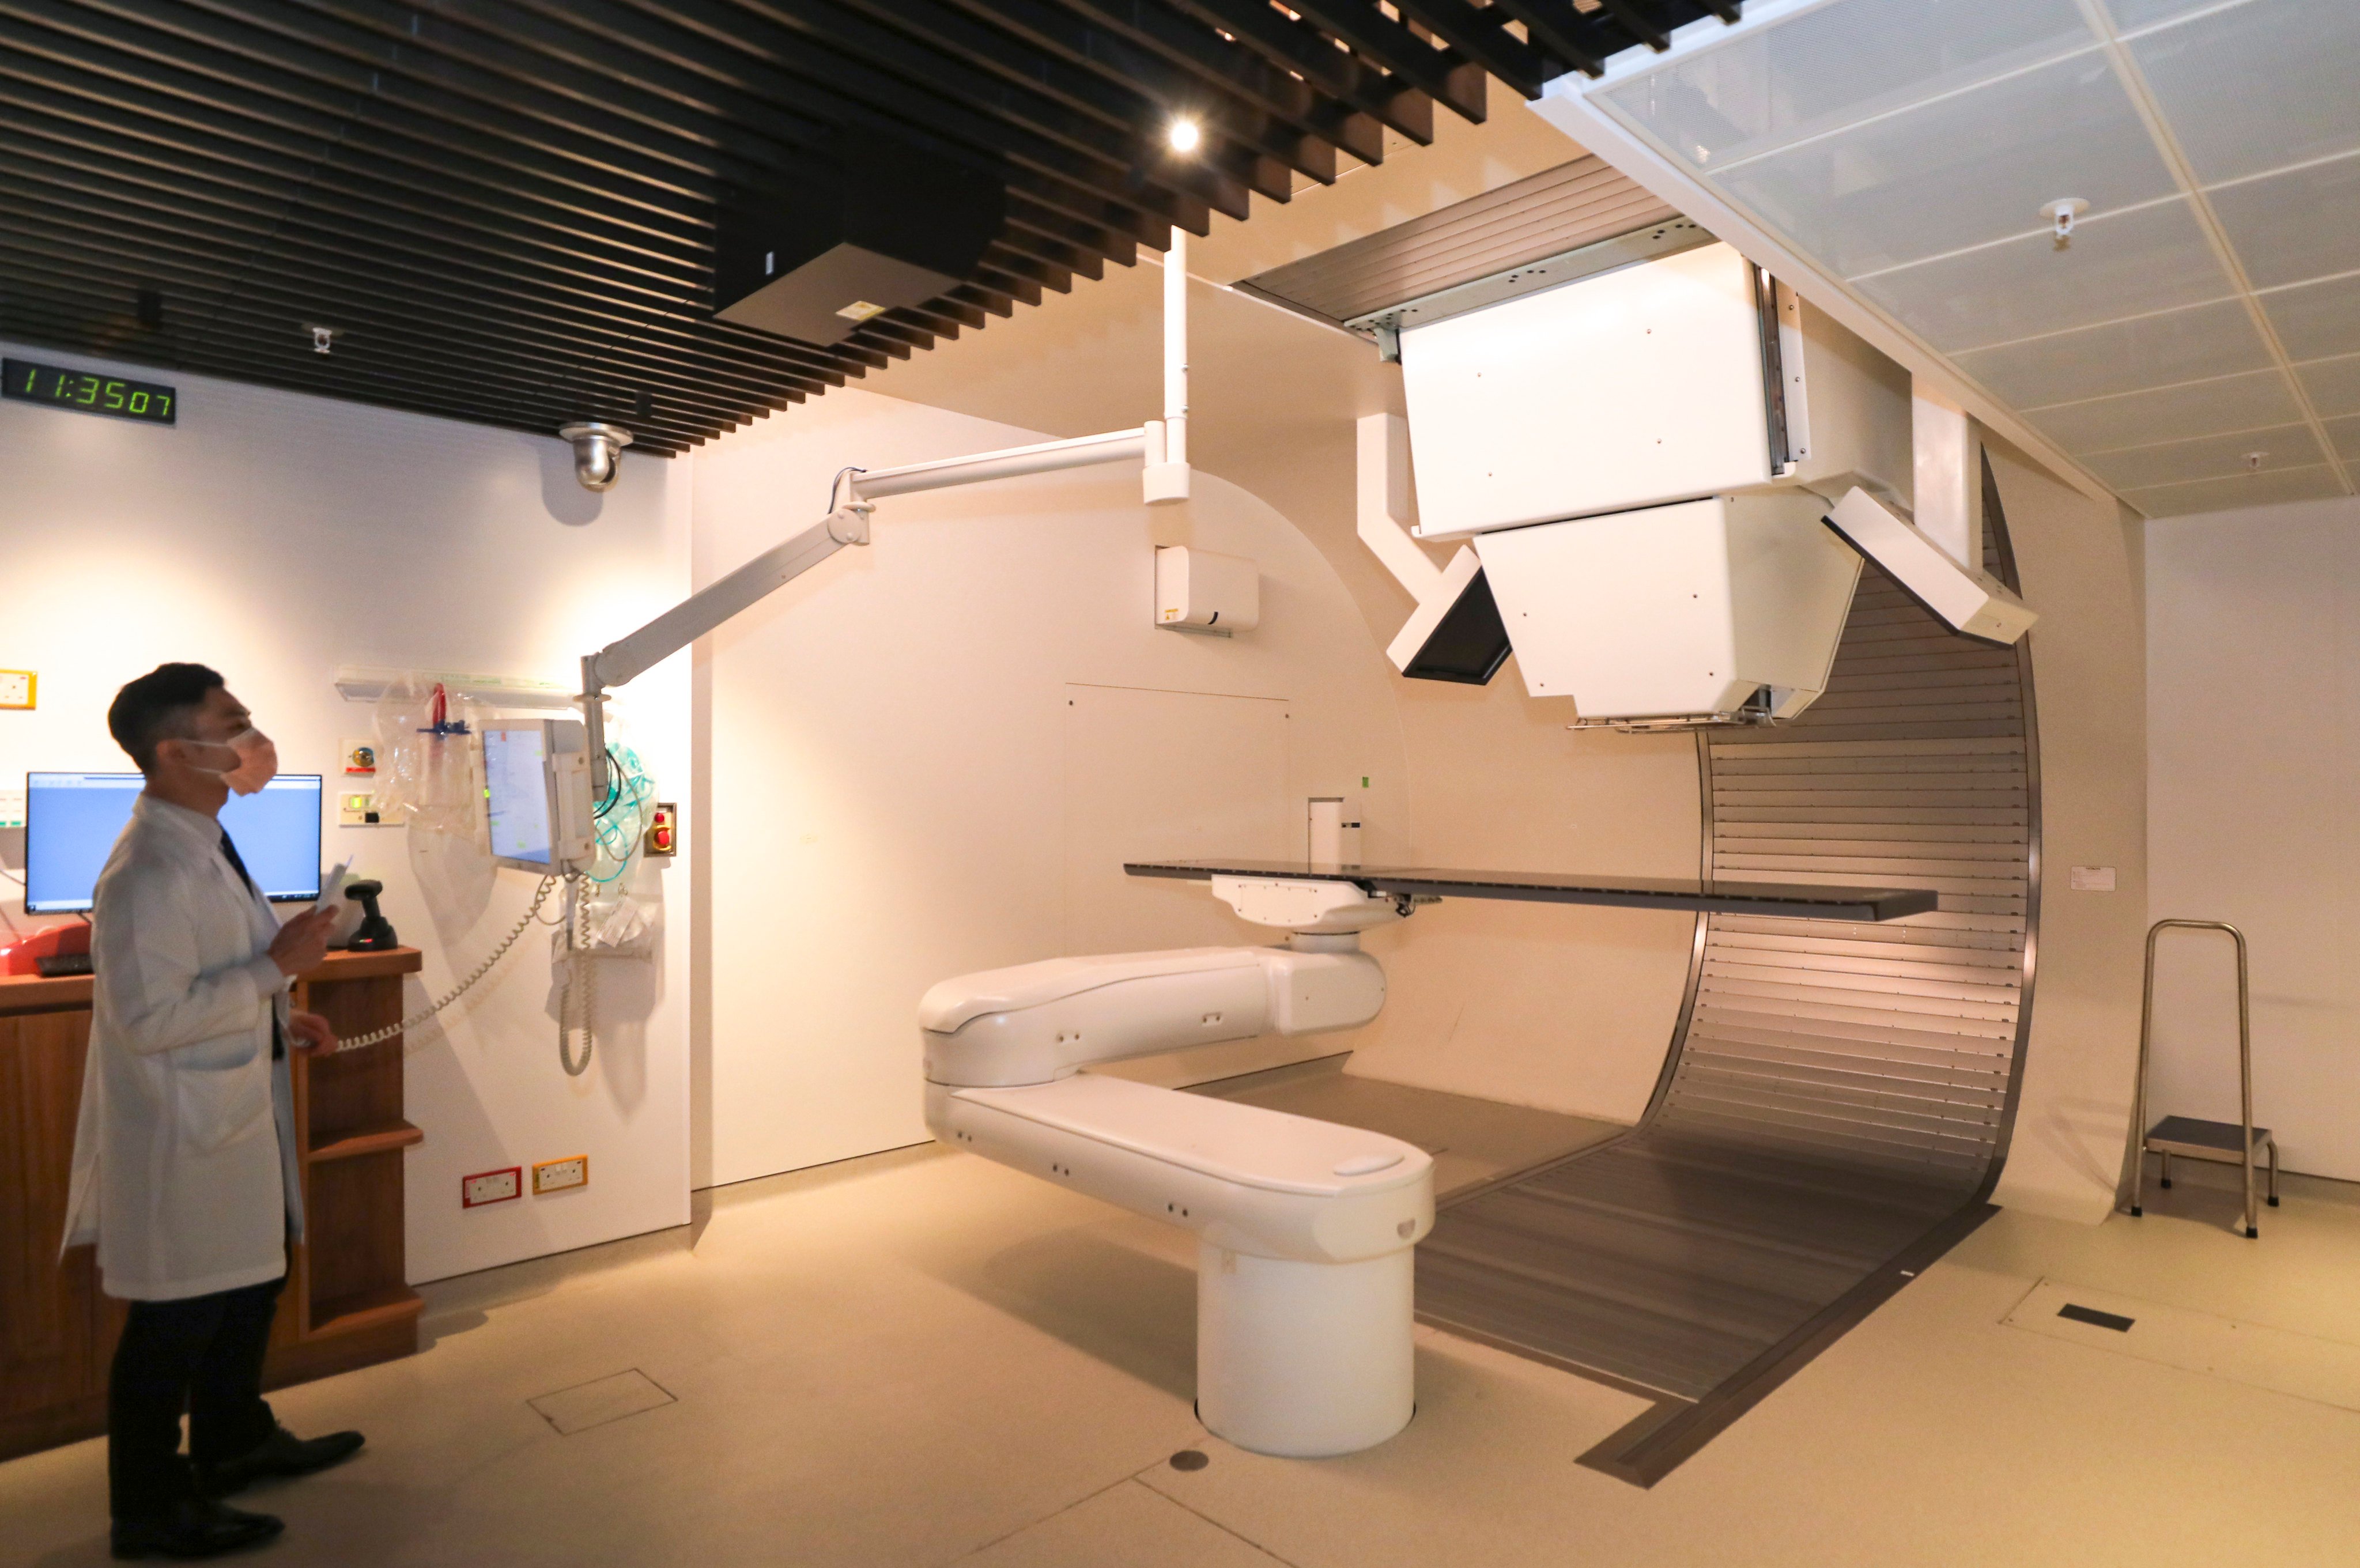 The proton therapy set-up at Hong Kong Sanatorium and Hospital in Shau Kei Wan is the city’s first. Photo: Xiaomei Chen